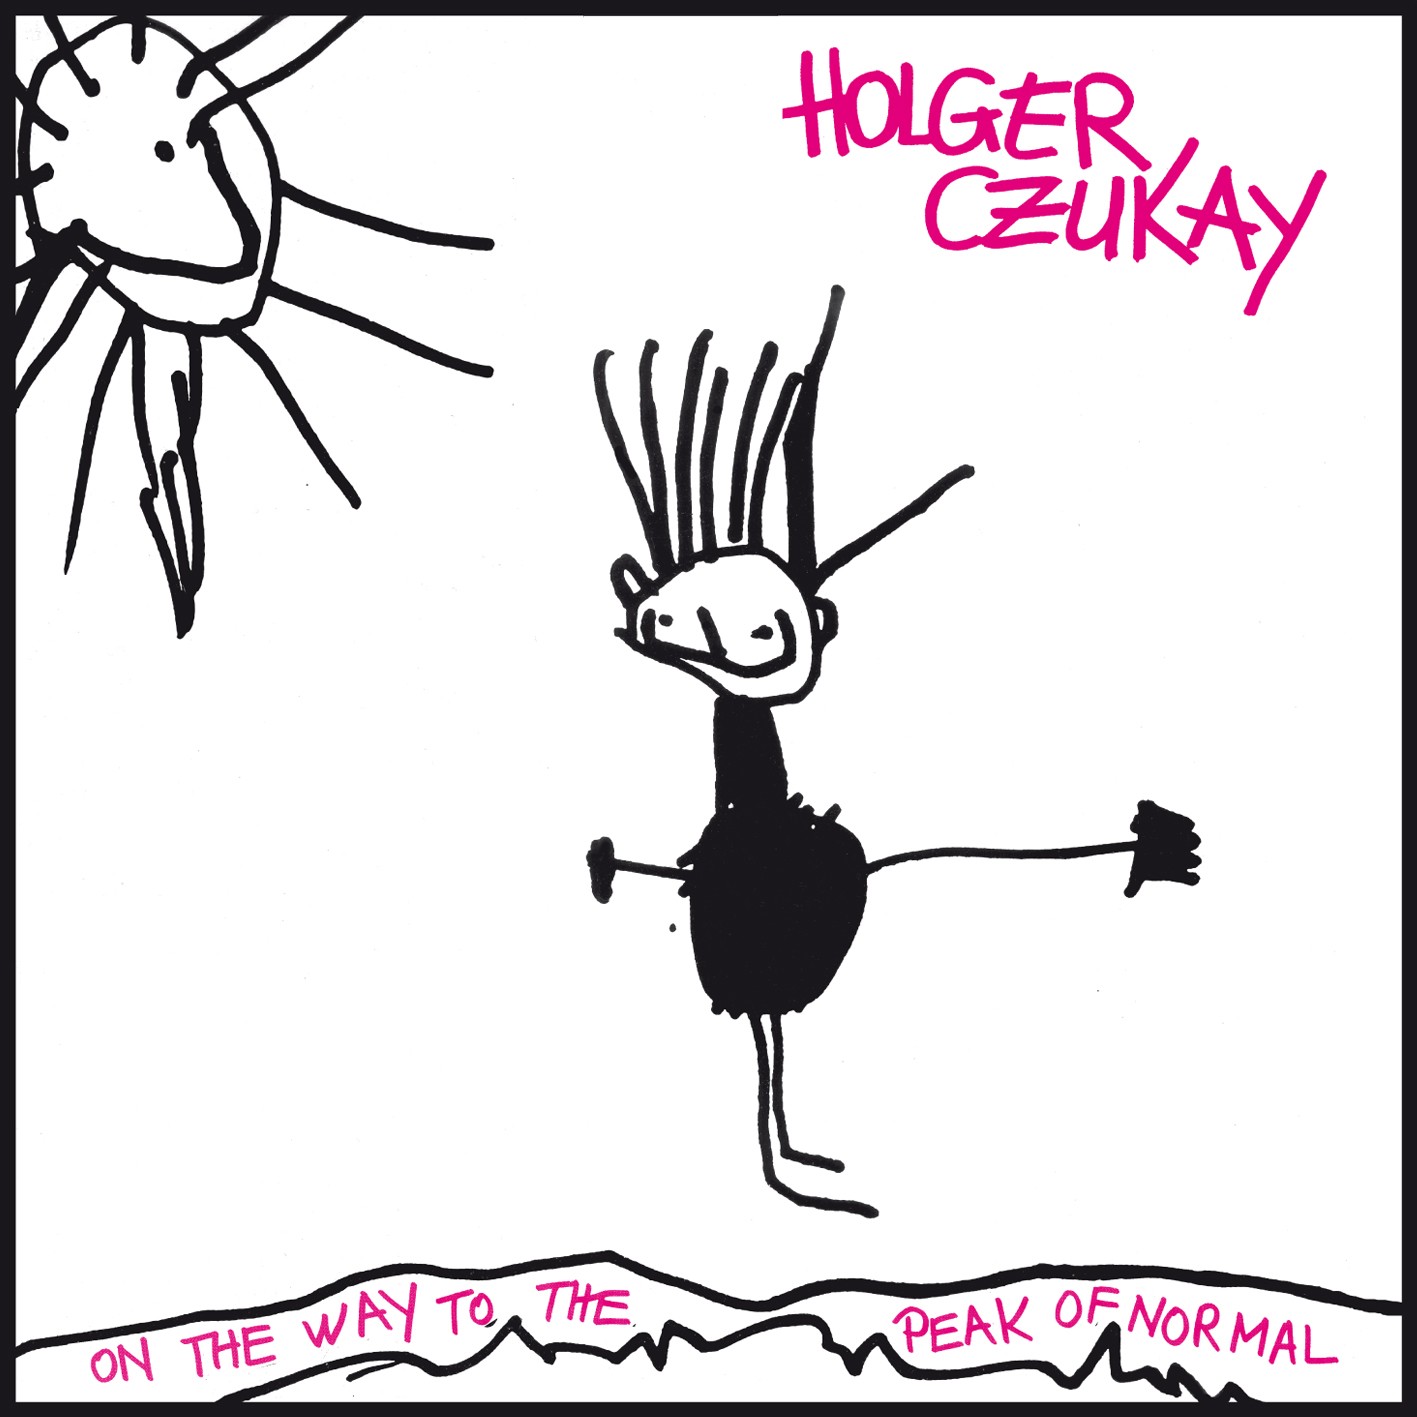 Holger Czukay - On the way to the peak of normal CD